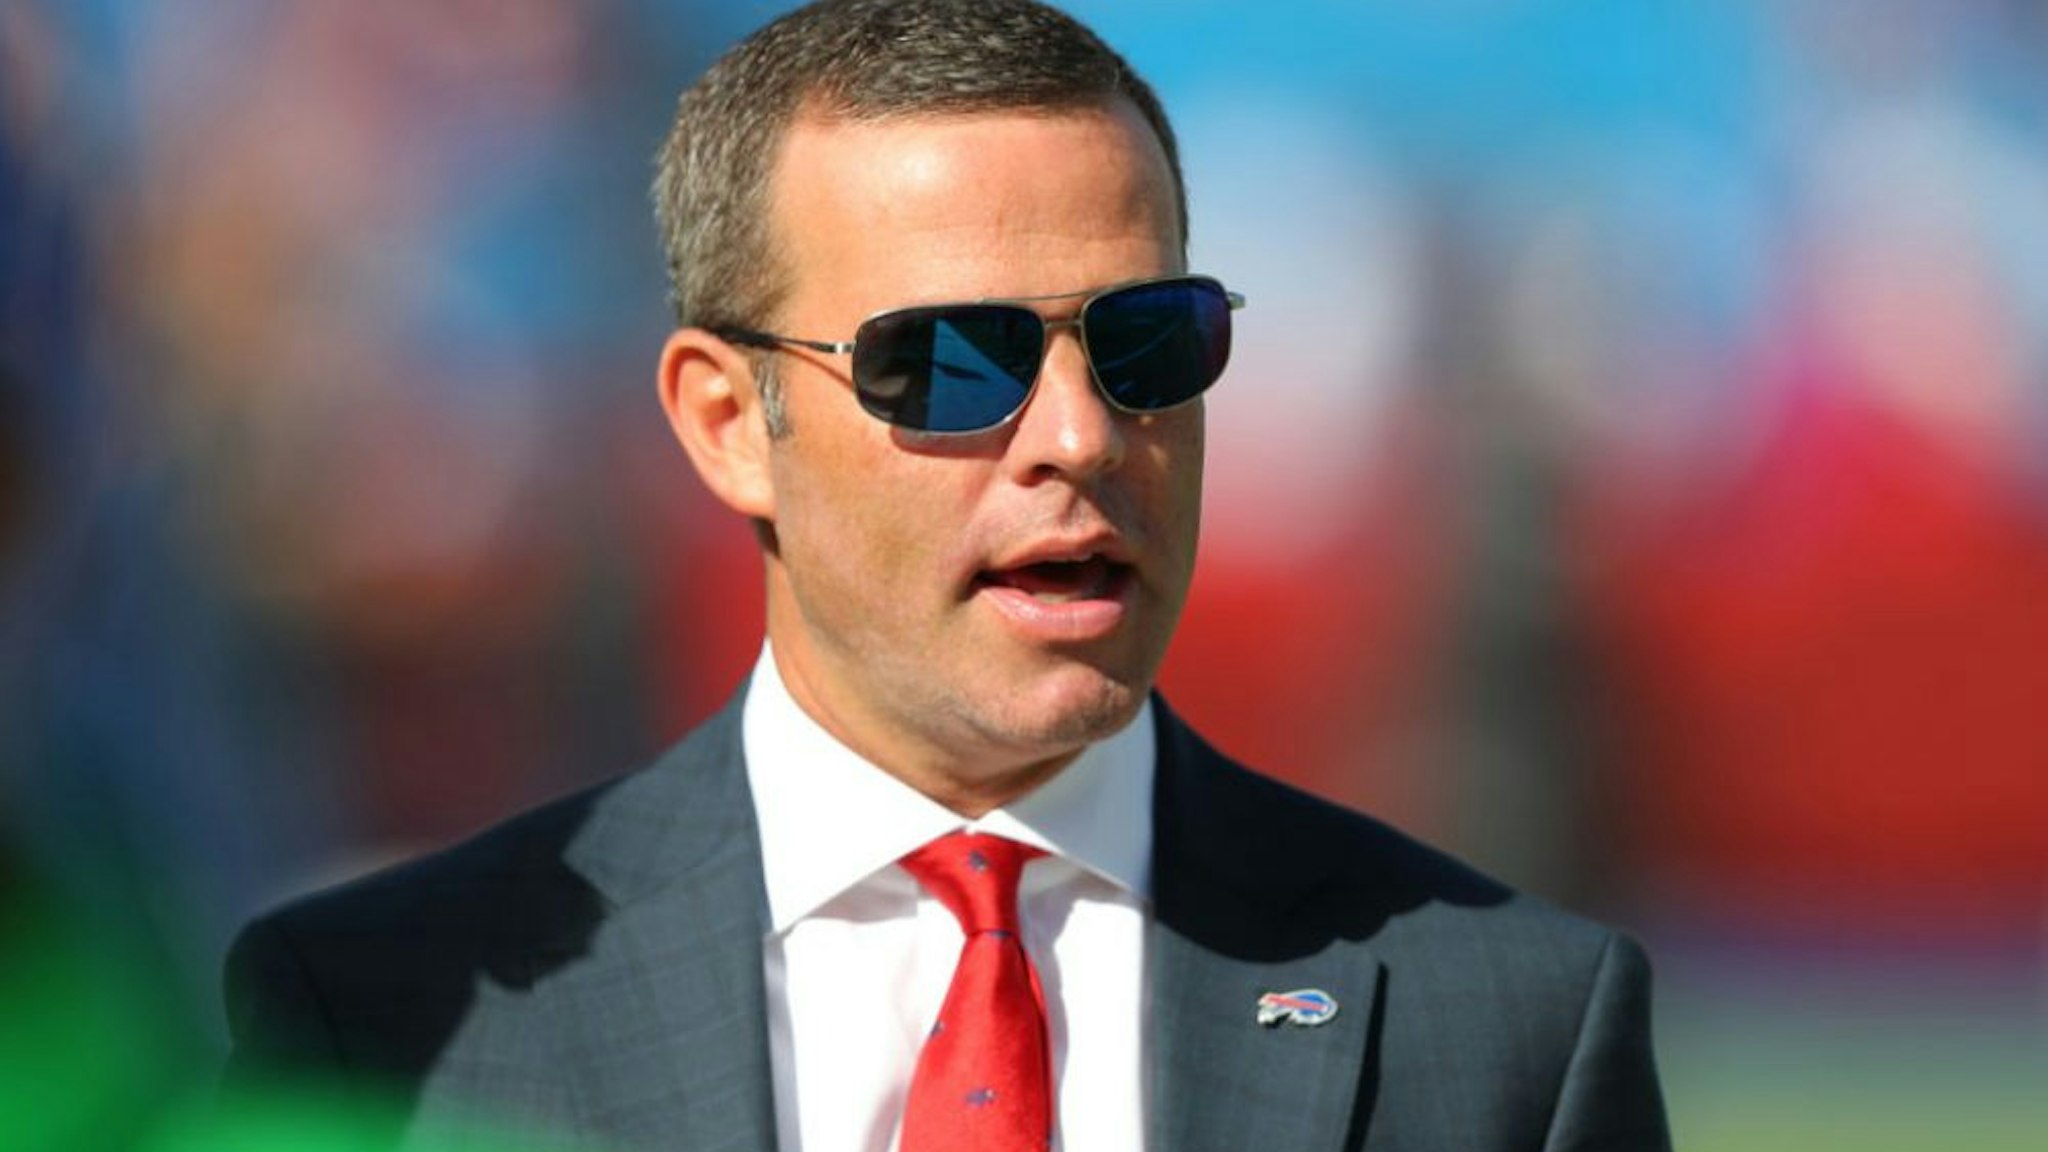 ORCHARD PARK, NY - OCTOBER 20: Buffalo Bills general manager Brandon Beane on the field before a game against the Miami Dolphins at New Era Field on October 20, 2019 in Orchard Park, New York. Buffalo beats Miami 31 to 21. (Photo by Timothy T Ludwig/Getty Images)